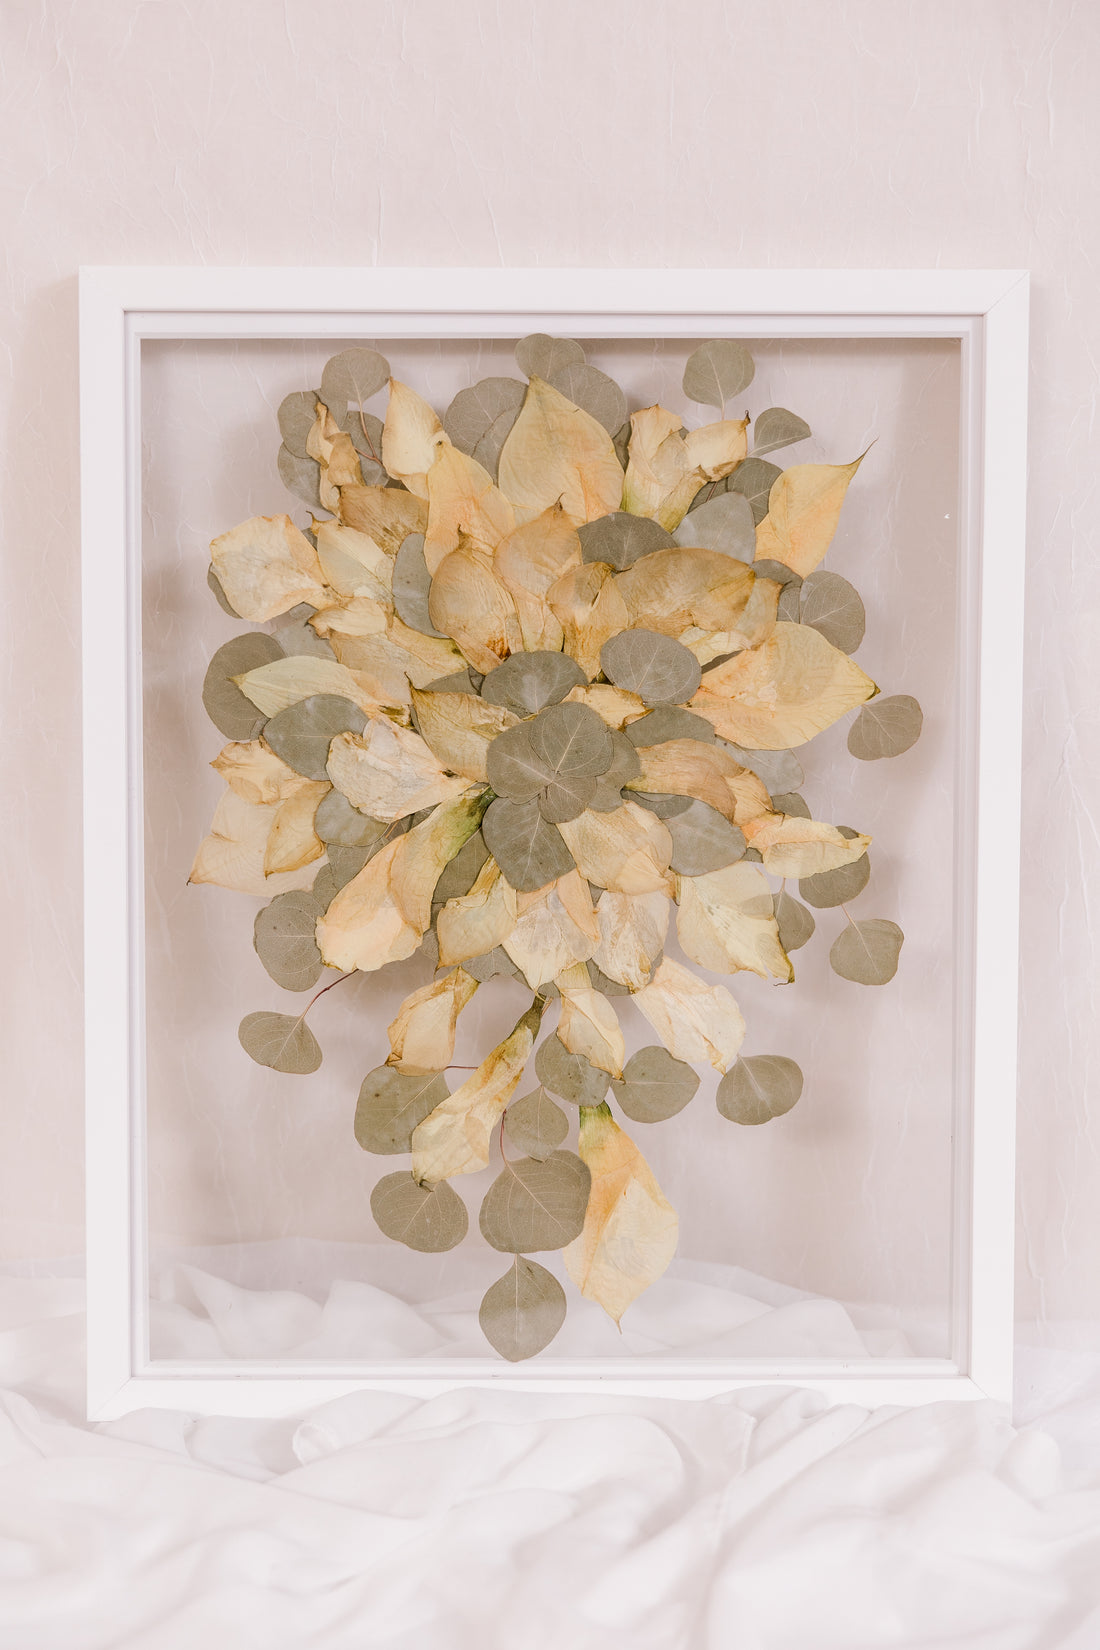 A frame filled with pressed calla lillies displayed in a white wood surround.